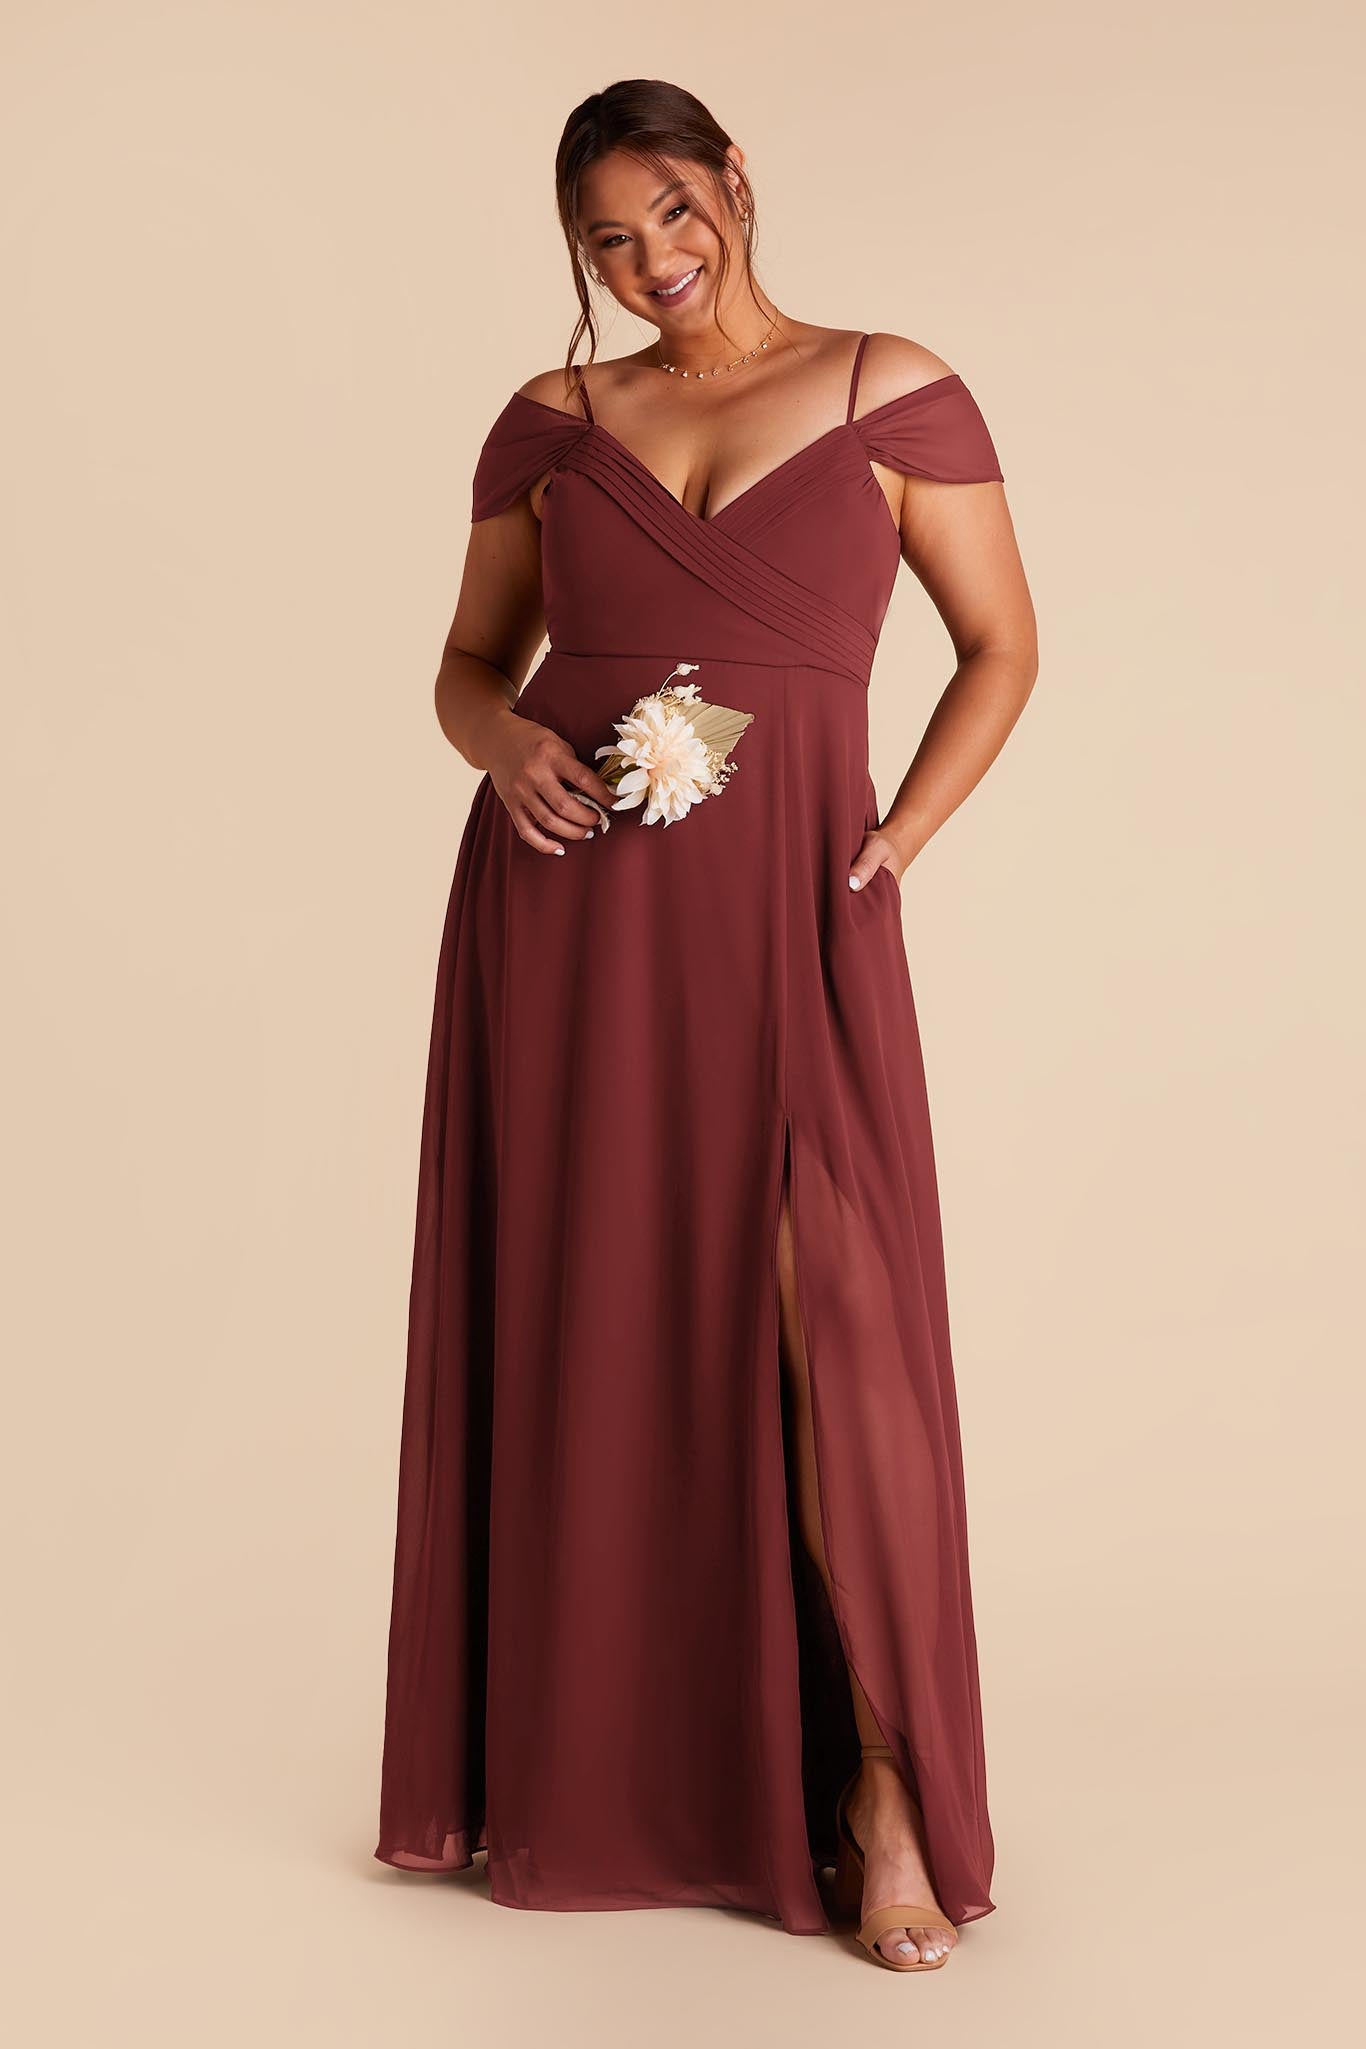 Rosewood Spence Convertible Dress by Birdy Grey